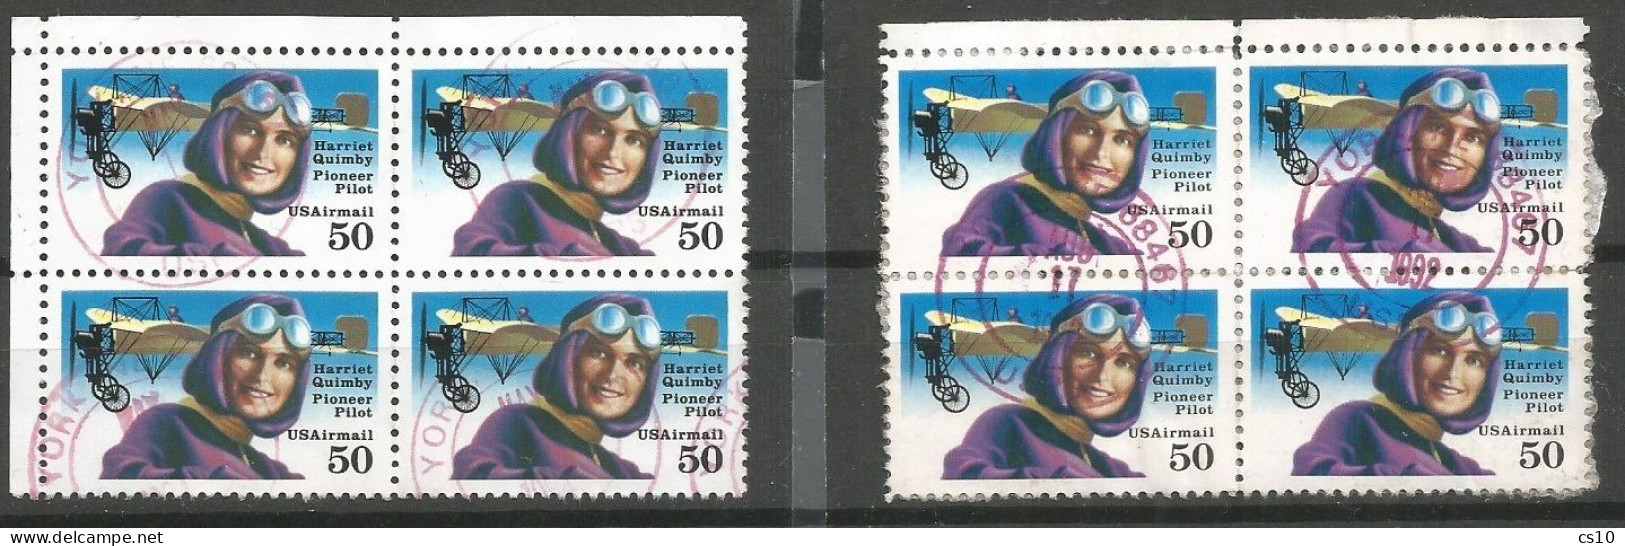 USA 1991 Aviation Pioneers C.50 Harriet Quimby Airmail SC.# C128 In #2 Used Blocks4 Perforation Line + Comb !!! - Colecciones & Lotes